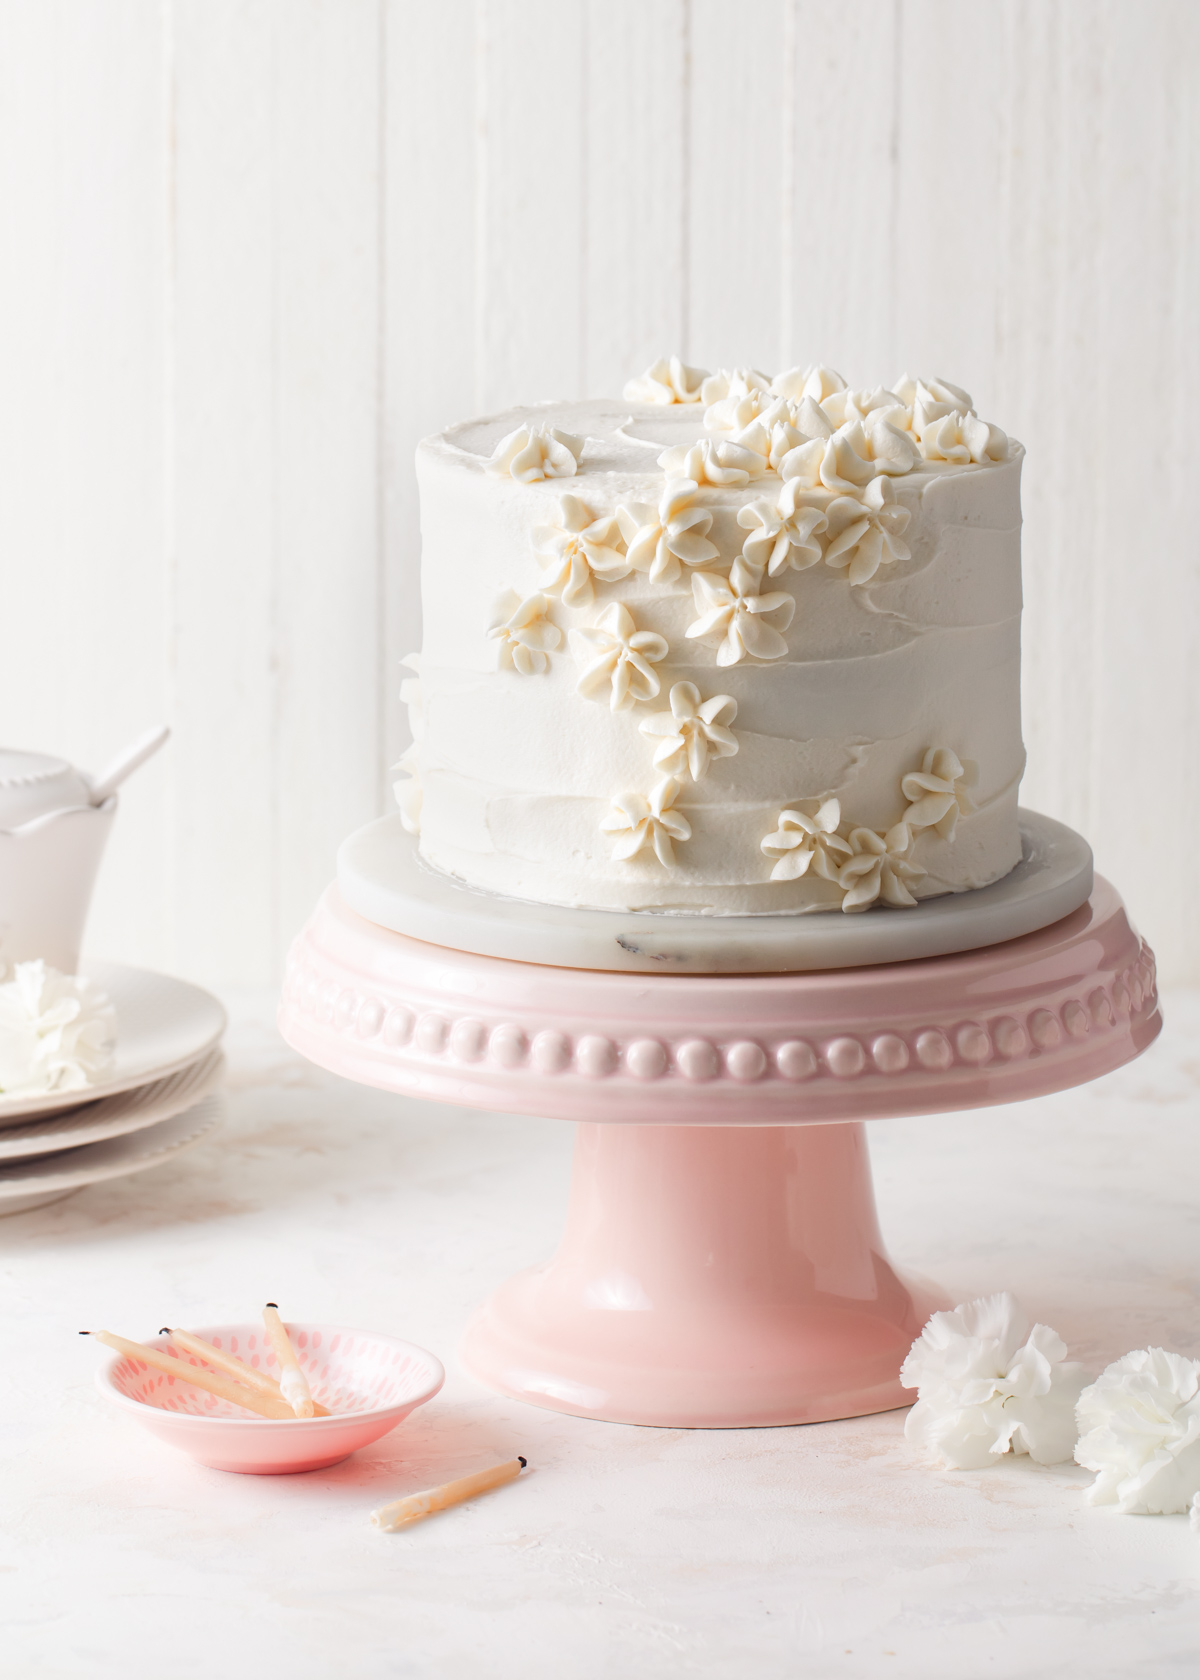 A 6-inch vanilla layer cake with piped vanilla frosting on a pink cake stand.